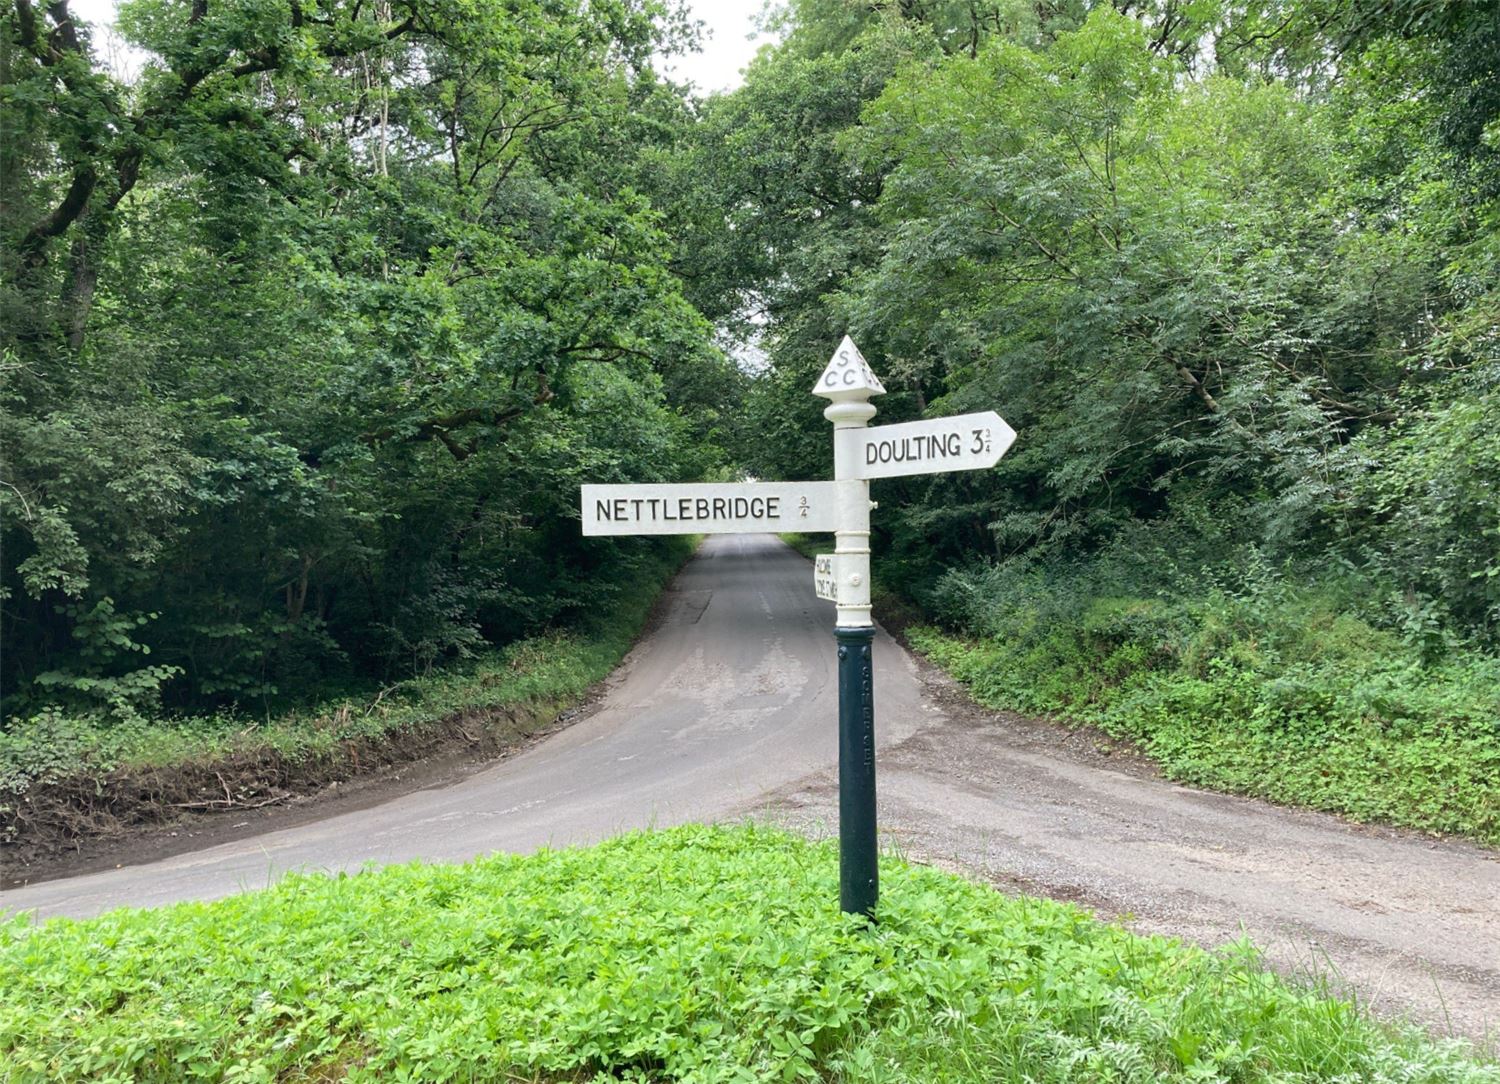 Explore the area signpost in rural lanes